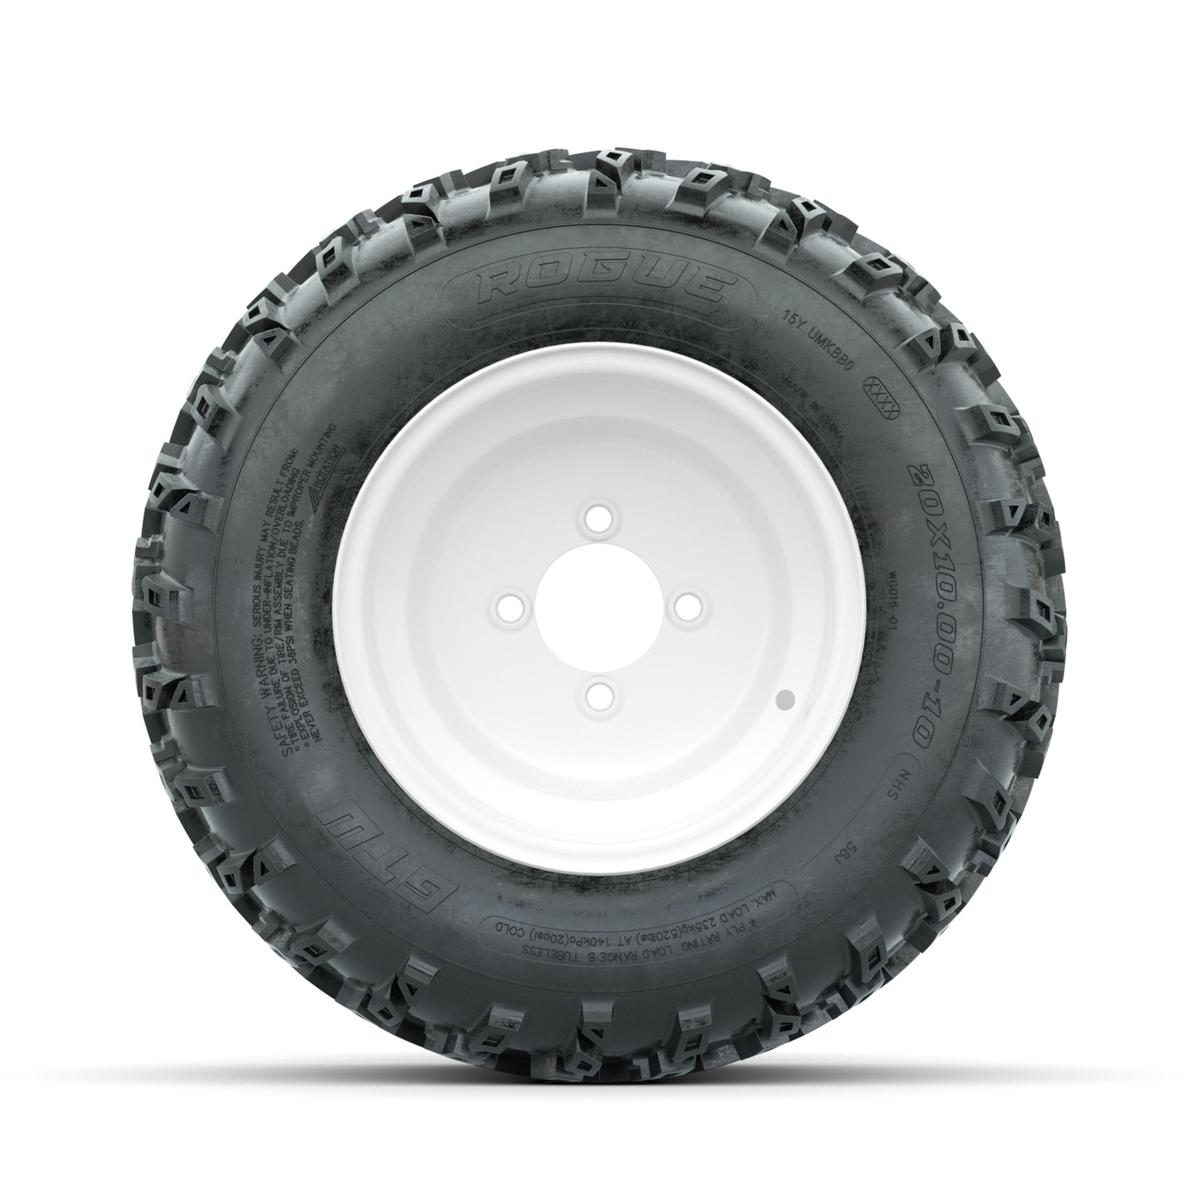 GTW Steel White 10 in Wheels with 20x10.00-10 Rogue All Terrain Tires – Full Set